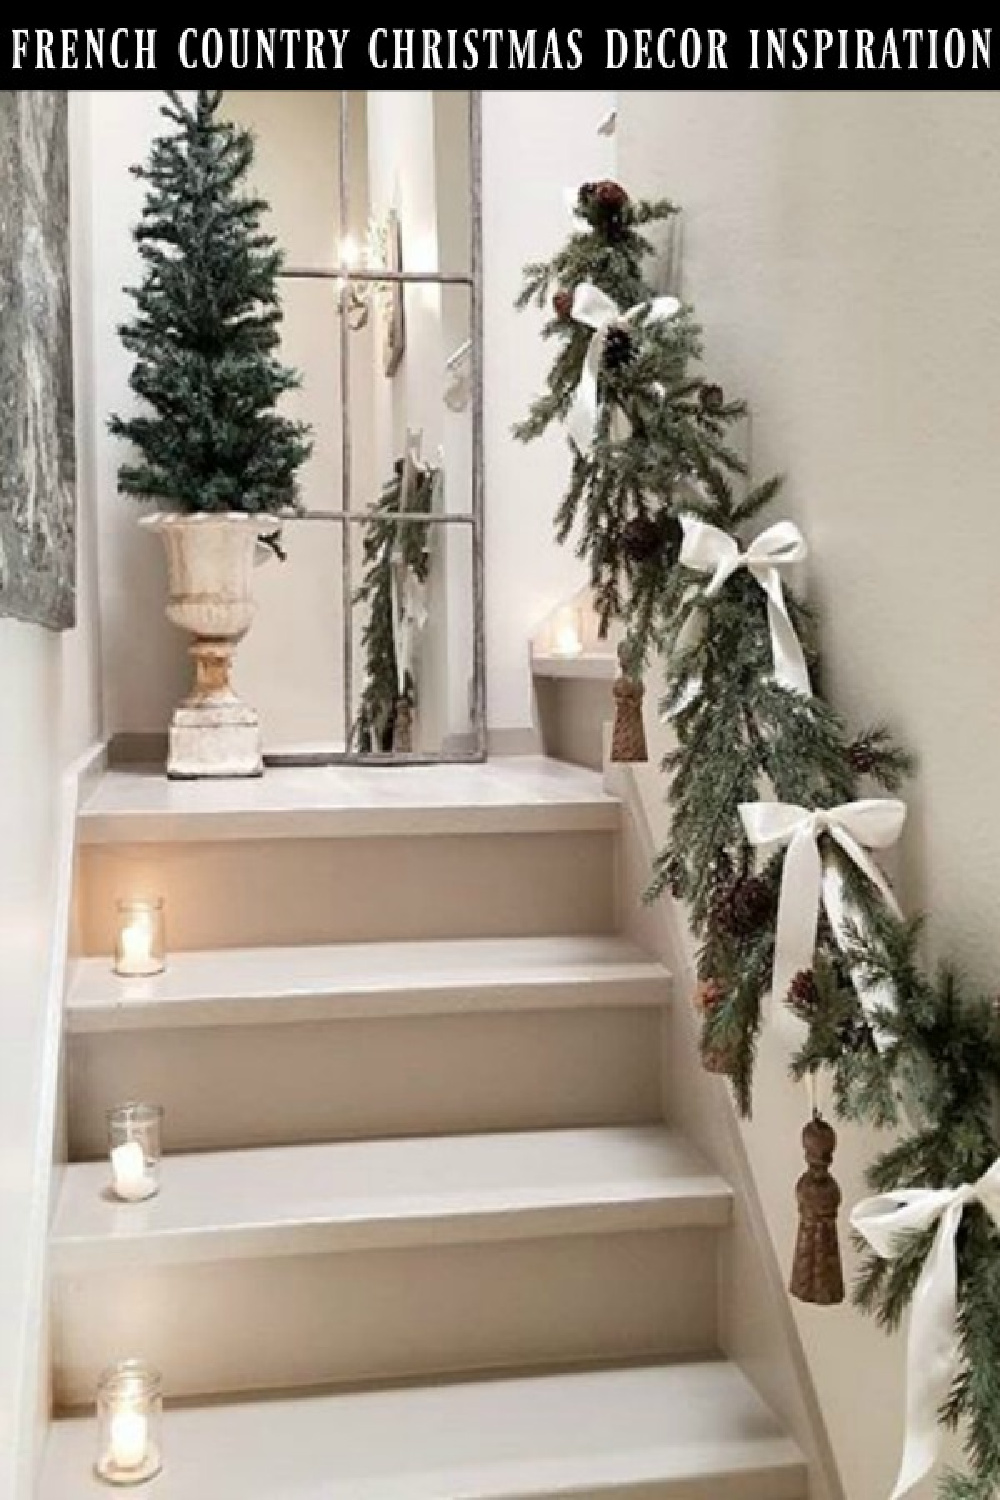 French country Christmas decor inspiration from The French Nest Co on Hello Lovely. #christmasdecor #frenchcountry #frenchfarmhouse #frenchchristmas